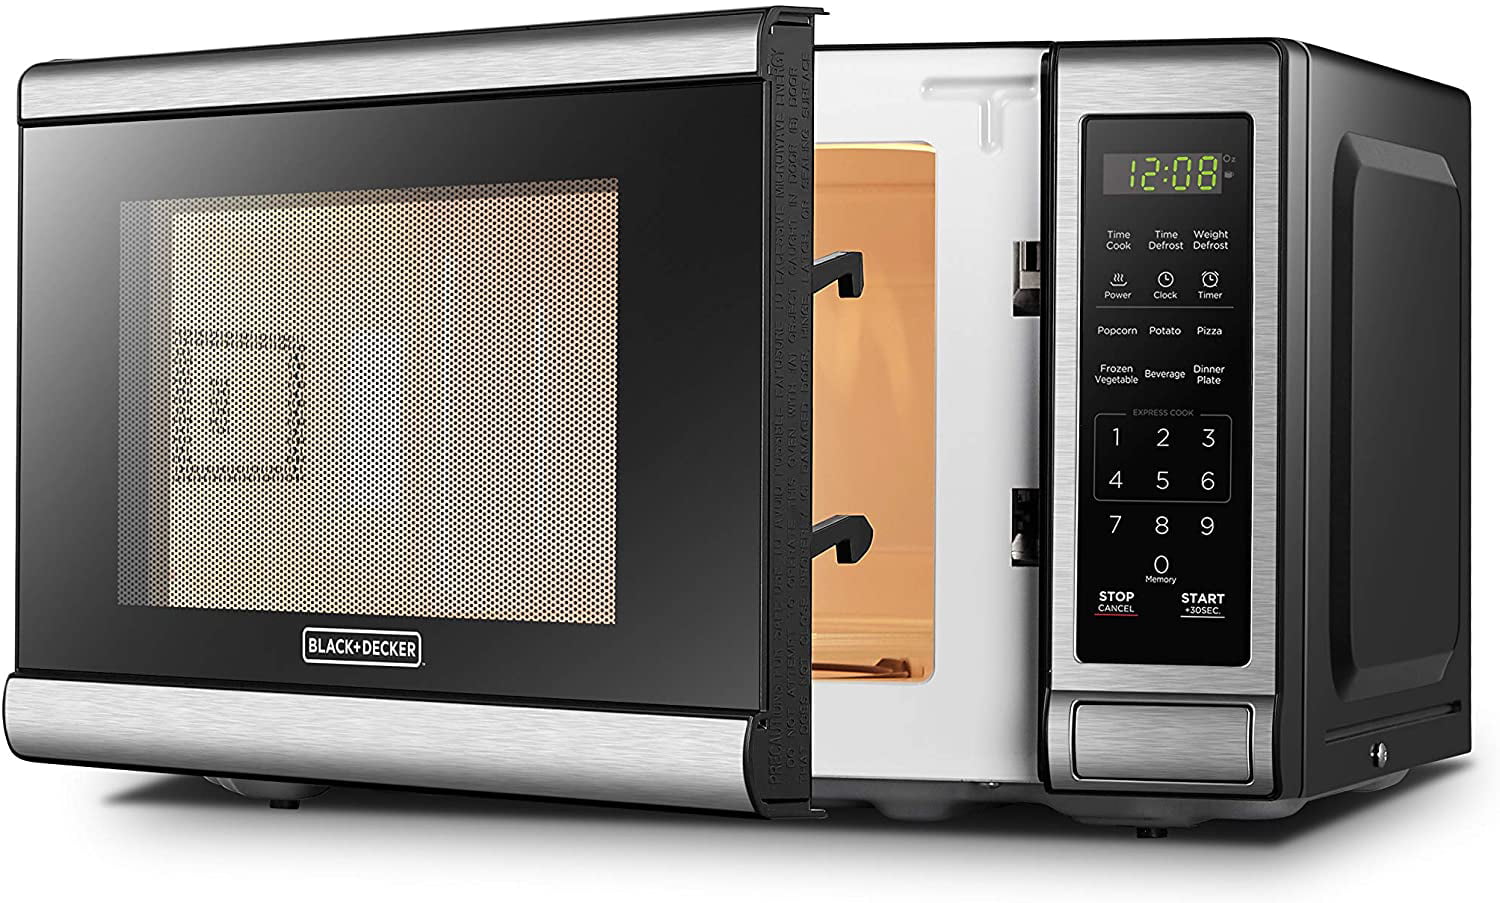 BLACK+DECKER Digital Microwave Oven with Turntable Push-Button